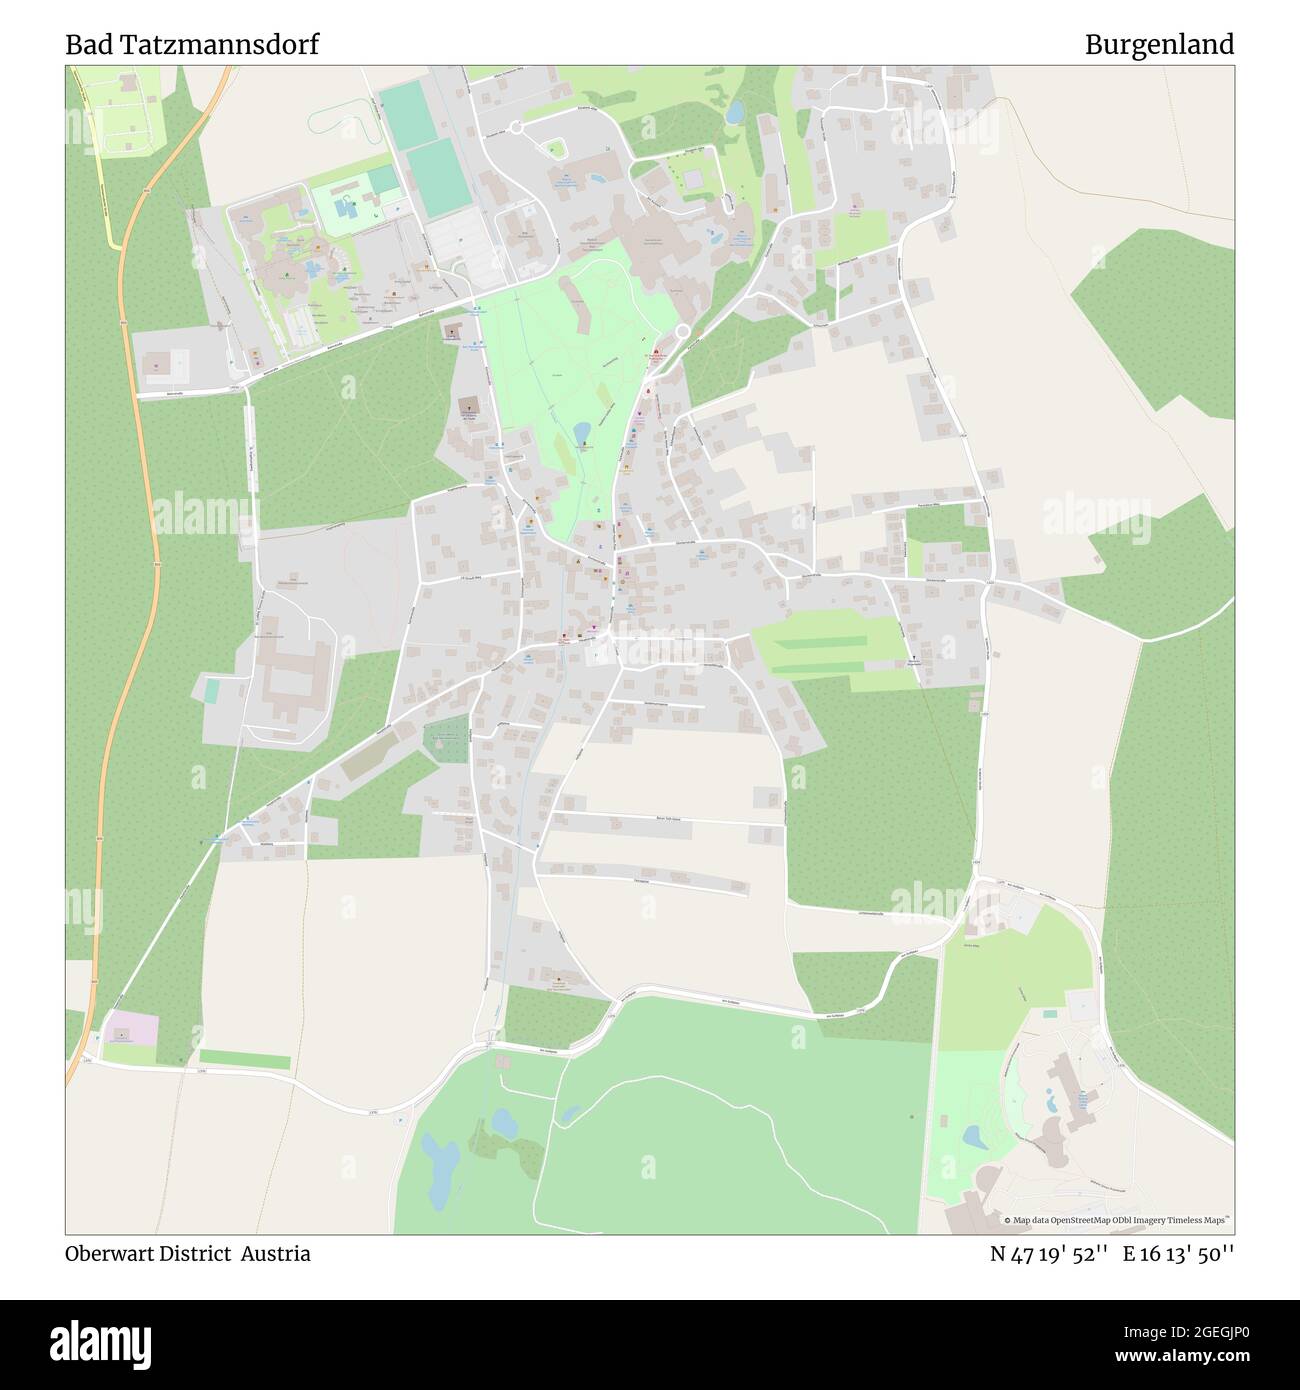 Bad Tatzmannsdorf, Oberwart District, Austria, Burgenland, N 47 19' 52'', E 16 13' 50'', map, Timeless Map published in 2021. Travelers, explorers and adventurers like Florence Nightingale, David Livingstone, Ernest Shackleton, Lewis and Clark and Sherlock Holmes relied on maps to plan travels to the world's most remote corners, Timeless Maps is mapping most locations on the globe, showing the achievement of great dreams Stock Photo